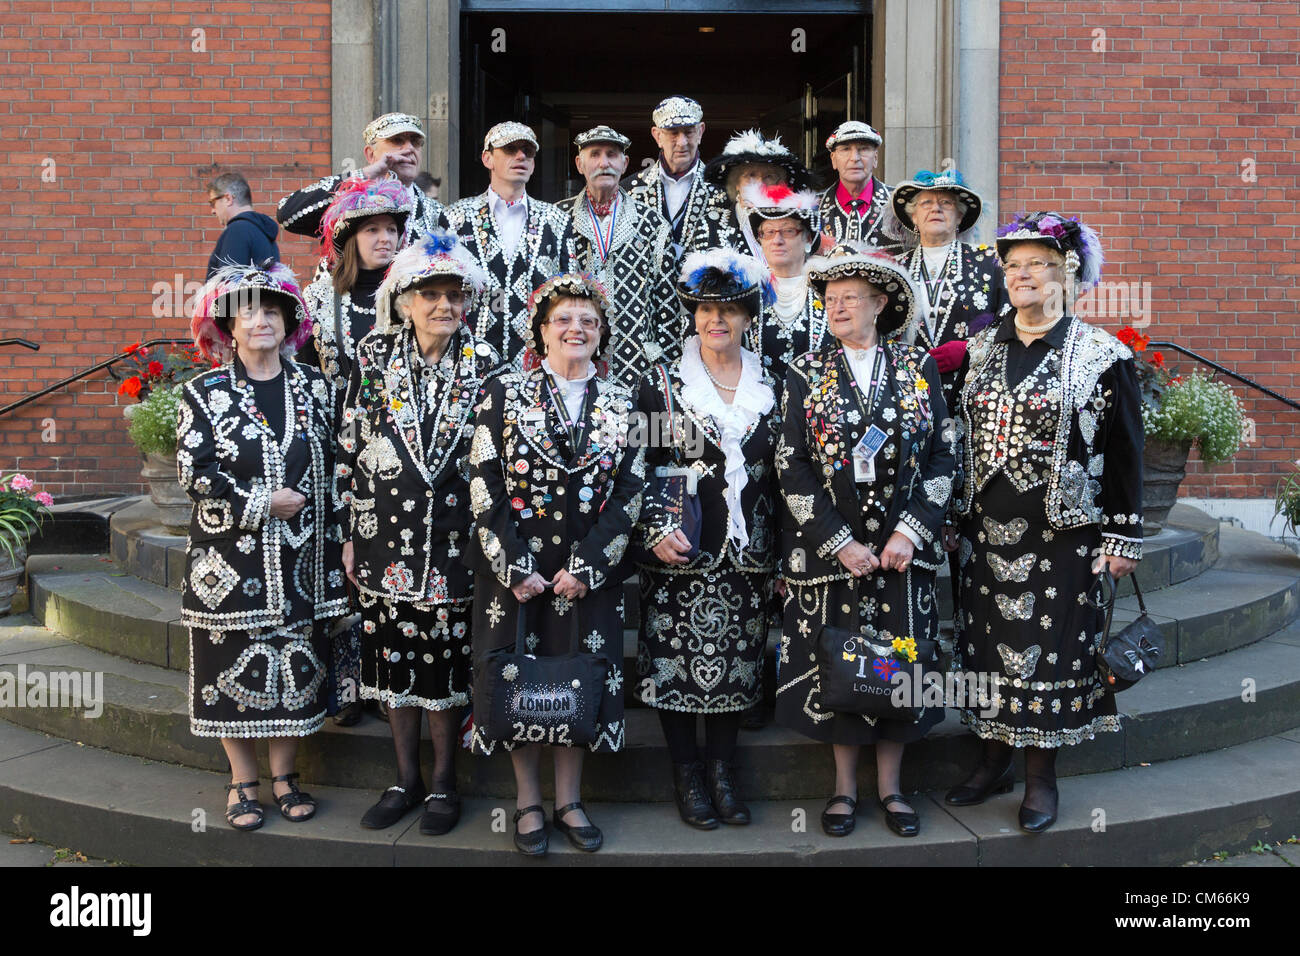 Pearly Kings & Queens from the Pearly Kings & Queens Society gather at St. Paul's Church in Covent Garden to celebrate the annual Harvest Festival. Stock Photo